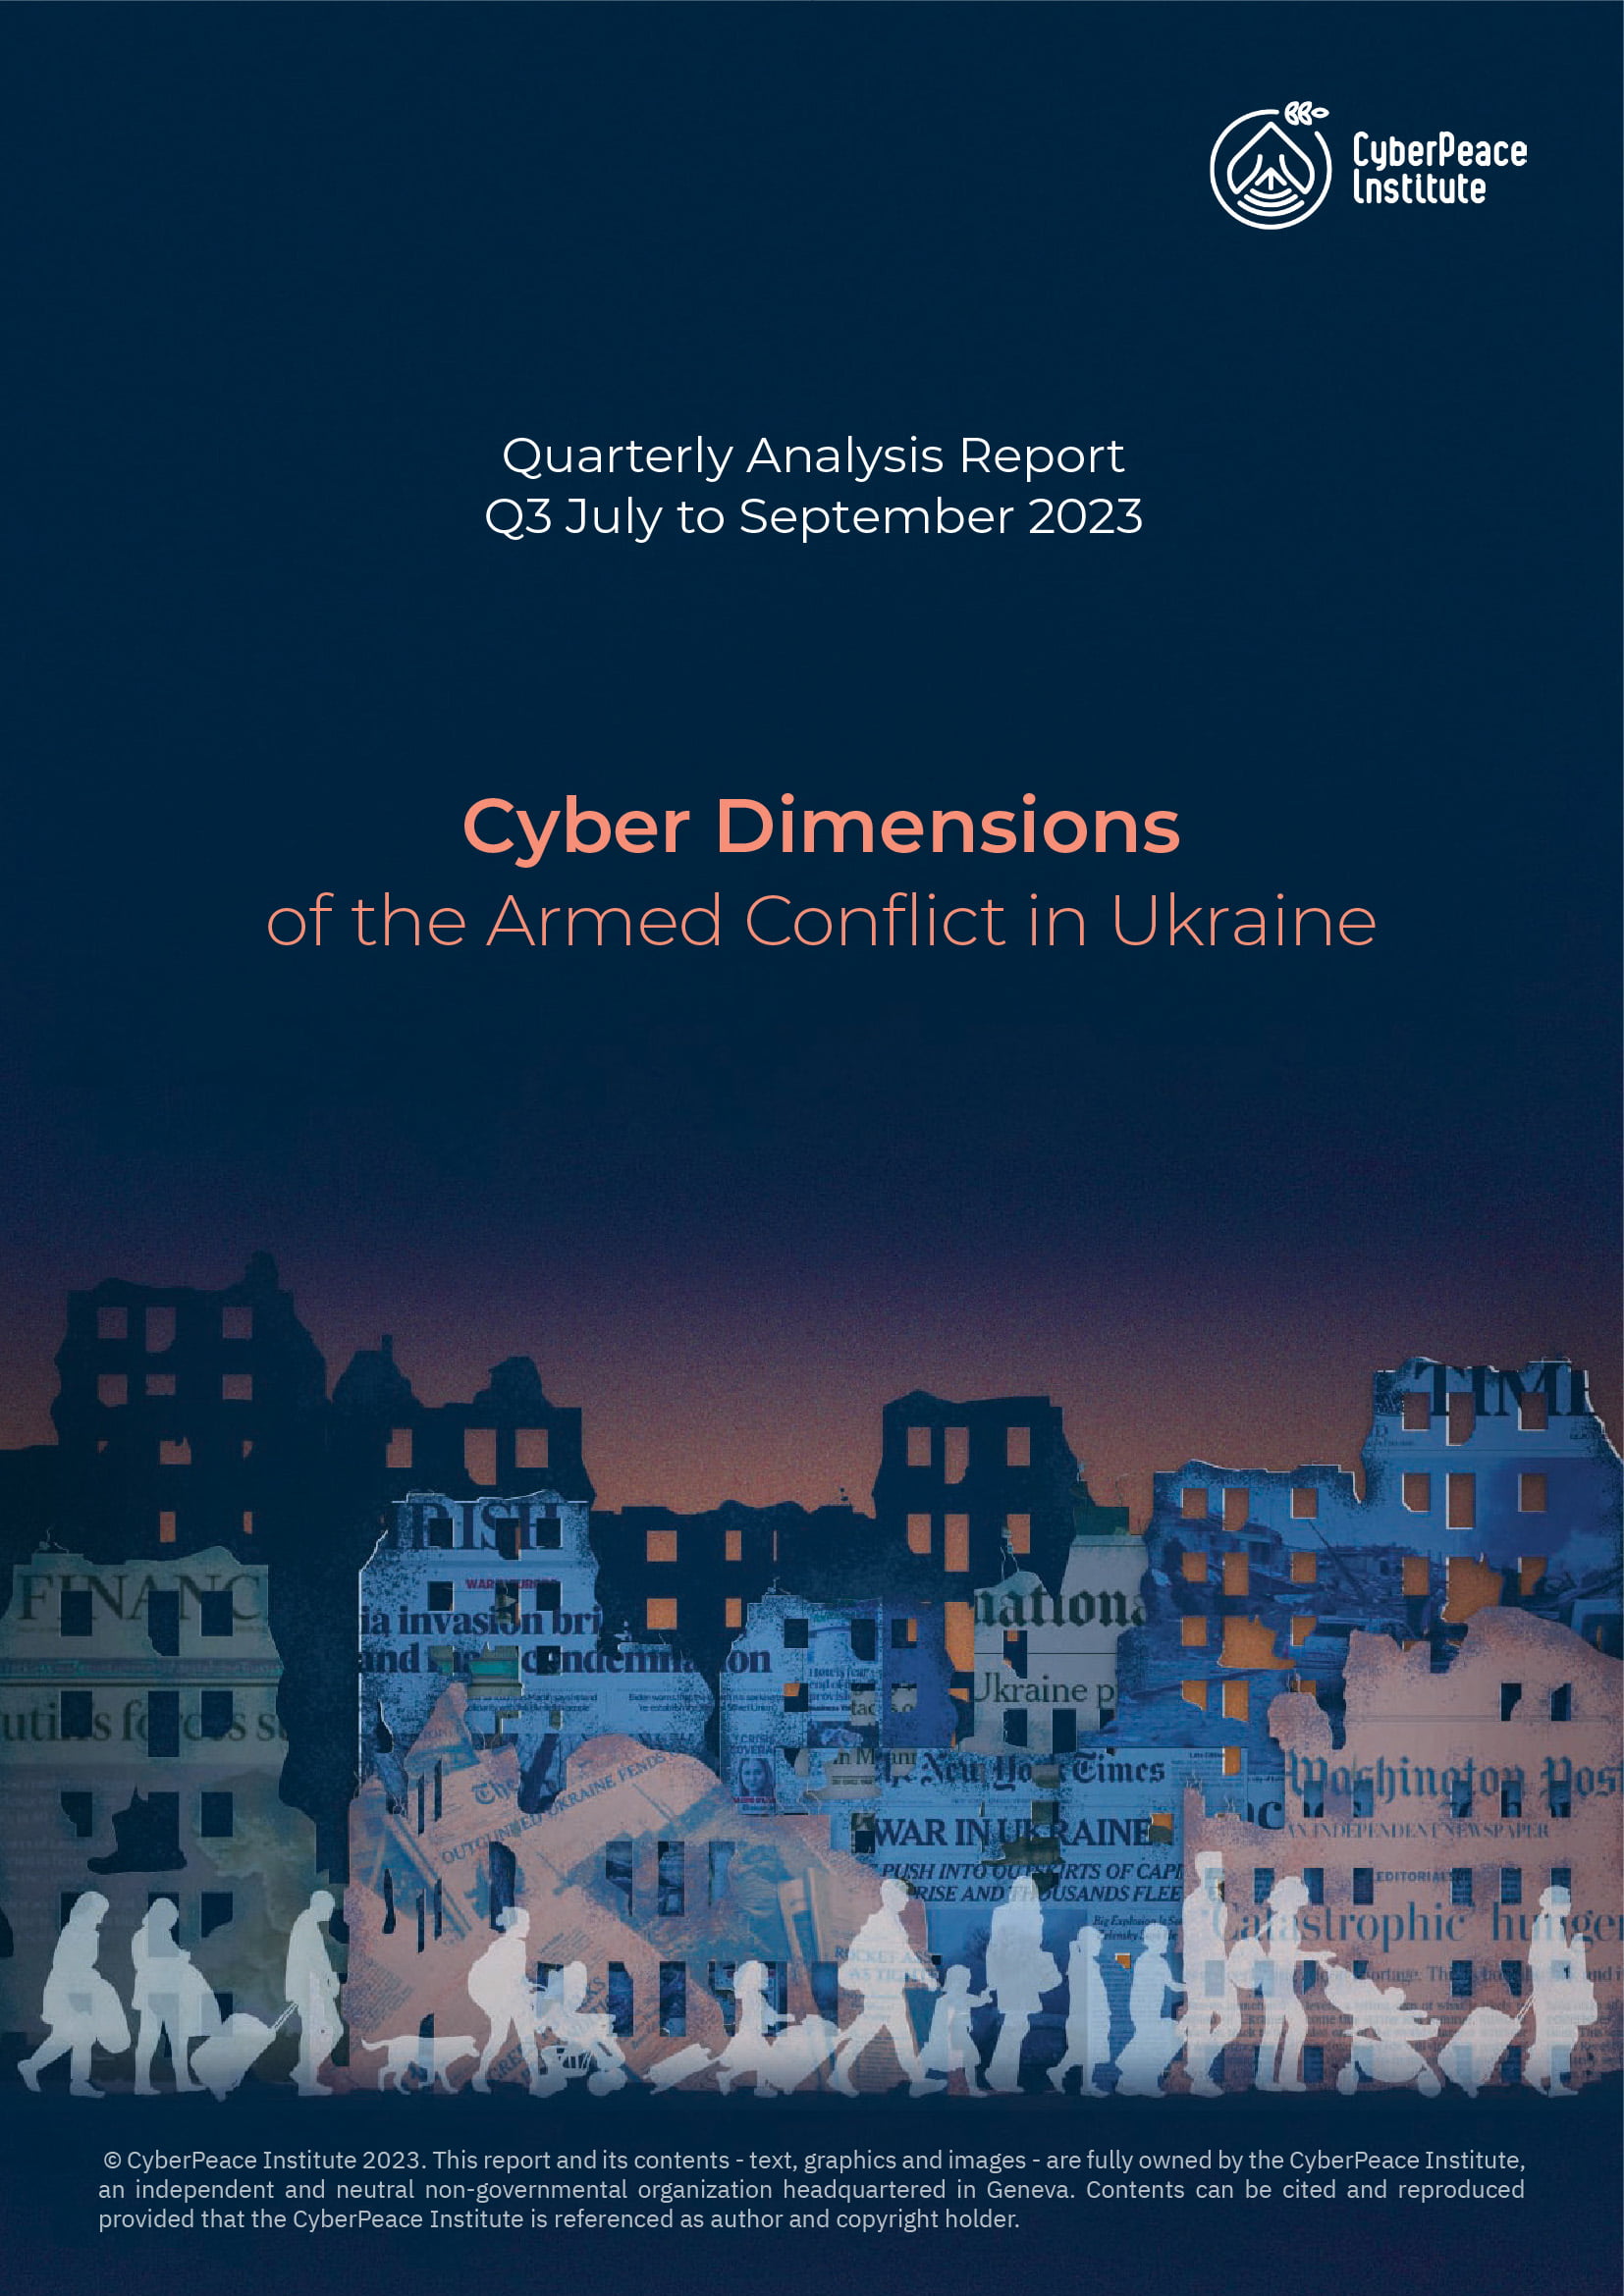 Cyber Dimensions of the Armed Conflict in Ukraine – Q3 2023